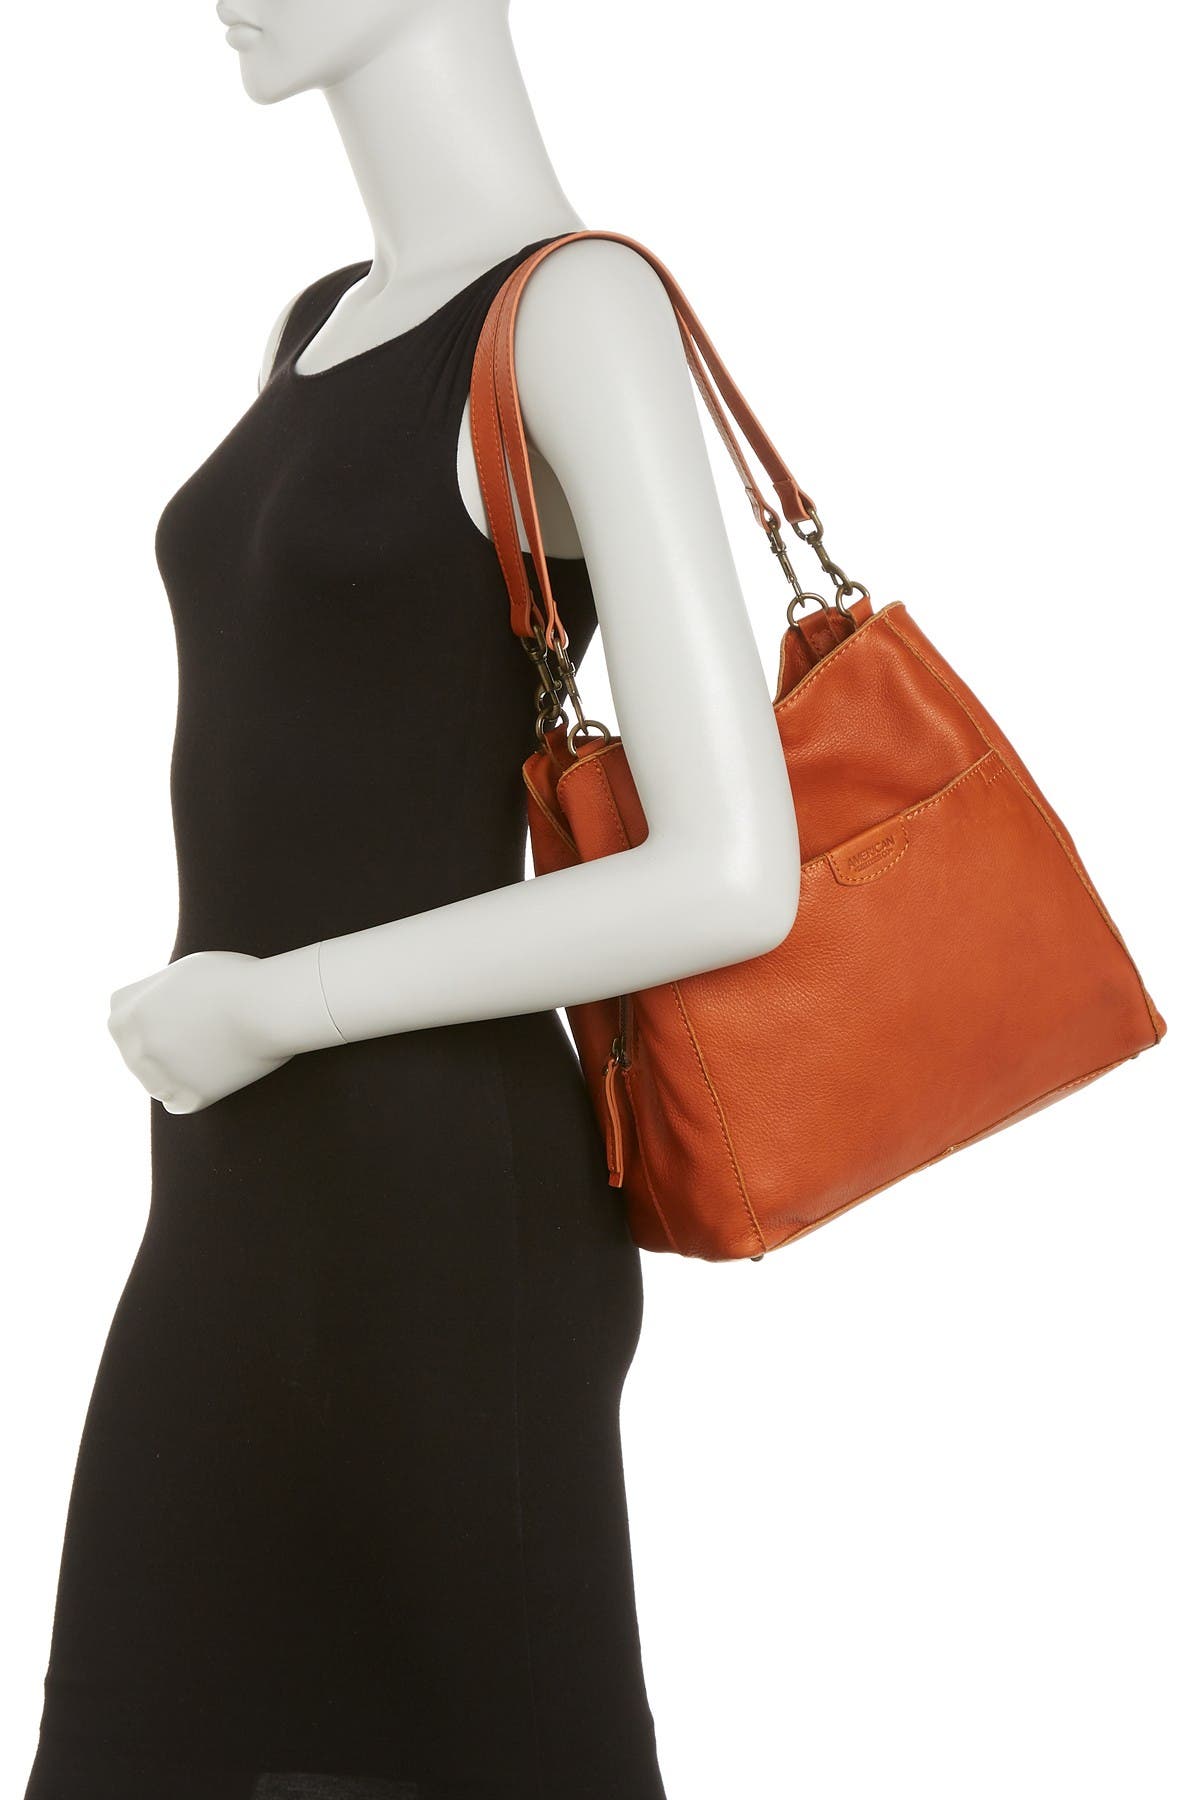 American Leather Co. Austin Leather Bucket Bag In Amber Smooth